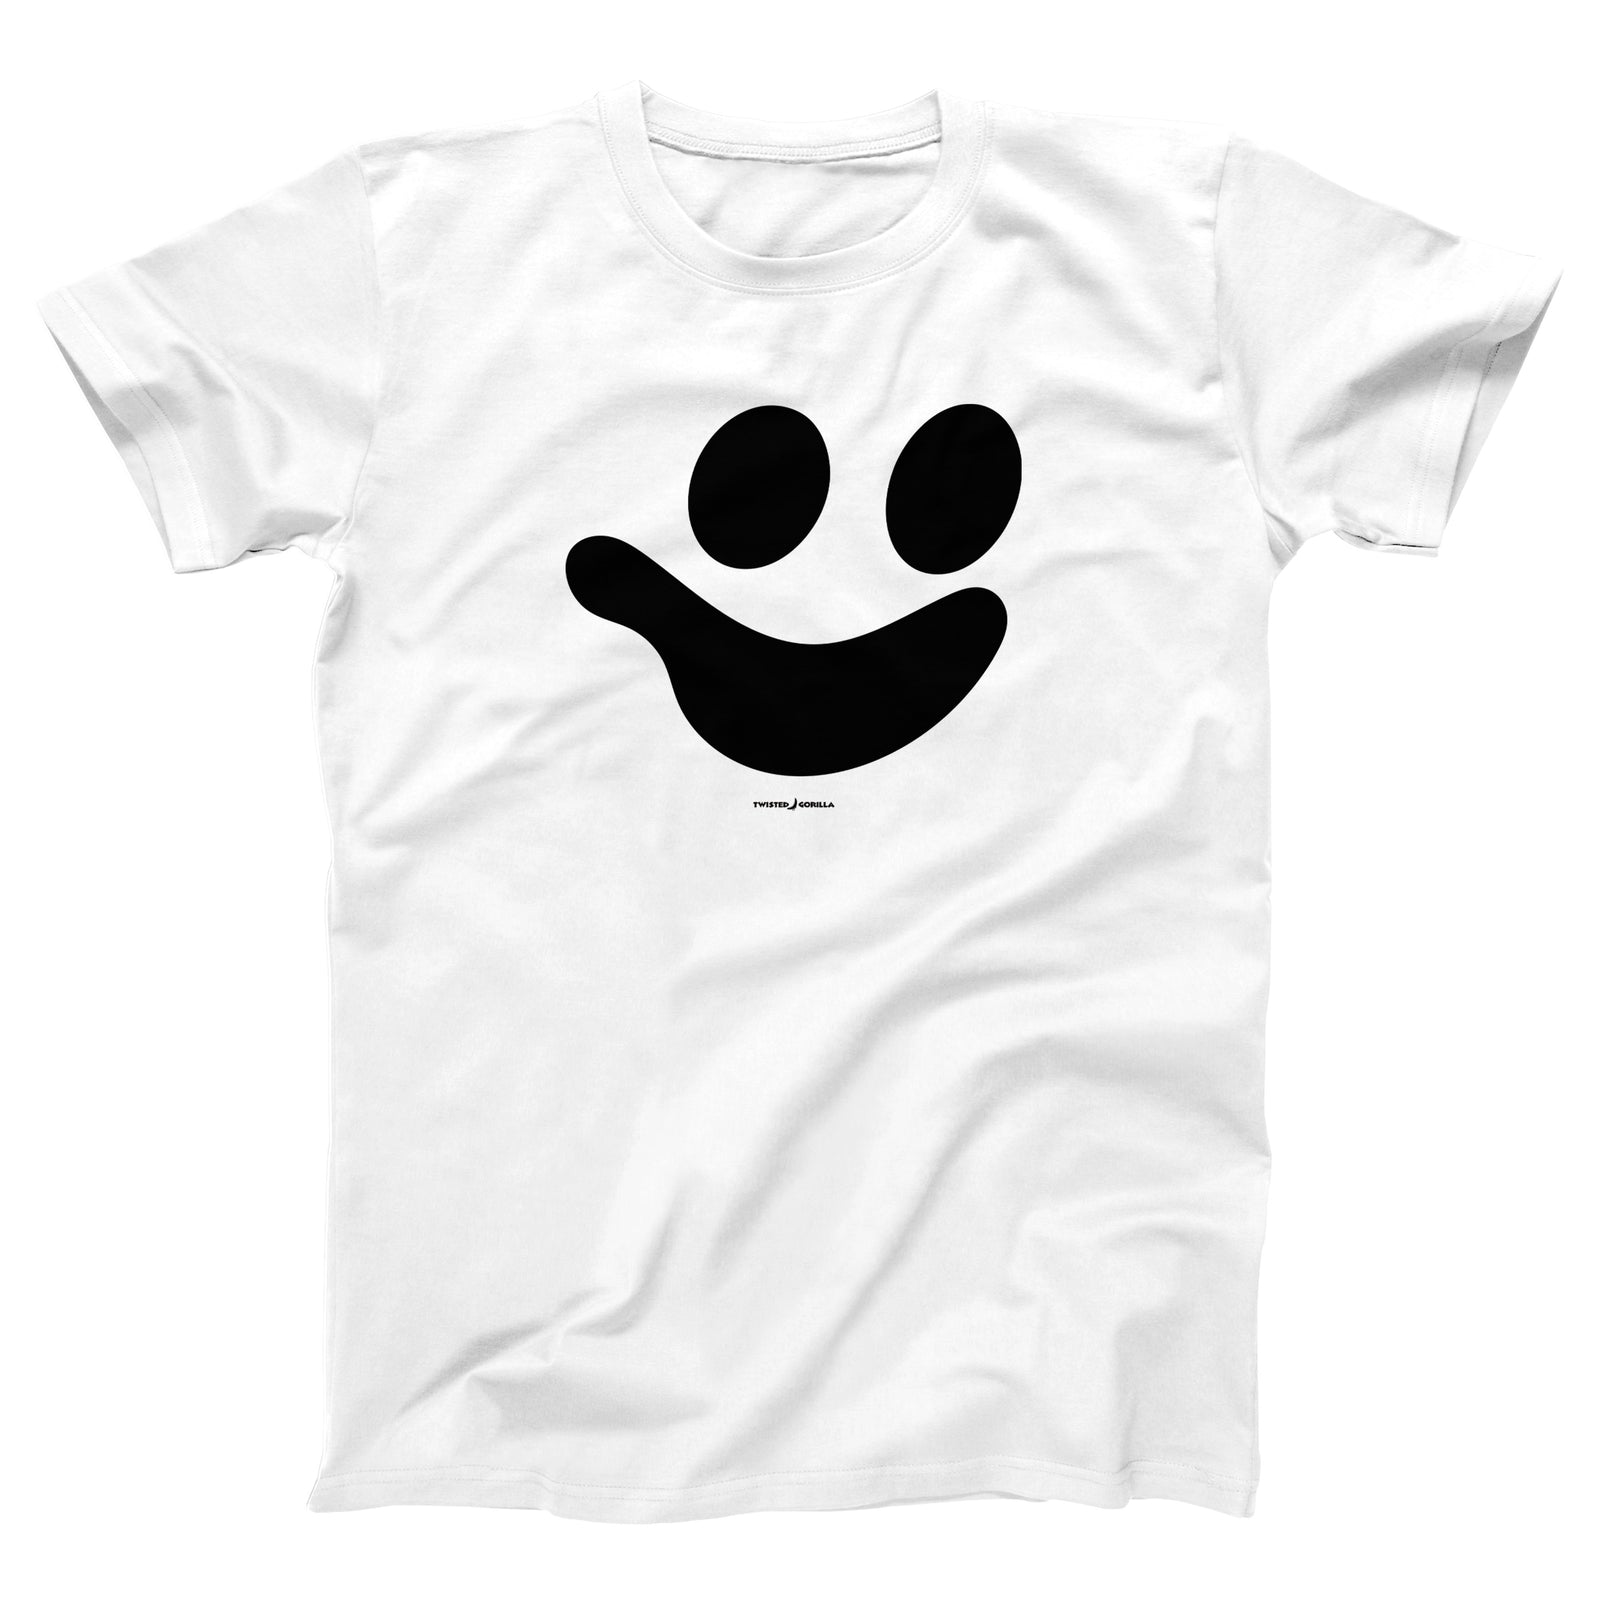 //cdn.shopify.com/s/files/1/0274/2488/2766/products/mcghost-menunisex-t-shirt-851176_5000x.jpg?v=1633991368 5000w,
    //cdn.shopify.com/s/files/1/0274/2488/2766/products/mcghost-menunisex-t-shirt-851176_4500x.jpg?v=1633991368 4500w,
    //cdn.shopify.com/s/files/1/0274/2488/2766/products/mcghost-menunisex-t-shirt-851176_4000x.jpg?v=1633991368 4000w,
    //cdn.shopify.com/s/files/1/0274/2488/2766/products/mcghost-menunisex-t-shirt-851176_3500x.jpg?v=1633991368 3500w,
    //cdn.shopify.com/s/files/1/0274/2488/2766/products/mcghost-menunisex-t-shirt-851176_3000x.jpg?v=1633991368 3000w,
    //cdn.shopify.com/s/files/1/0274/2488/2766/products/mcghost-menunisex-t-shirt-851176_2500x.jpg?v=1633991368 2500w,
    //cdn.shopify.com/s/files/1/0274/2488/2766/products/mcghost-menunisex-t-shirt-851176_2000x.jpg?v=1633991368 2000w,
    //cdn.shopify.com/s/files/1/0274/2488/2766/products/mcghost-menunisex-t-shirt-851176_1800x.jpg?v=1633991368 1800w,
    //cdn.shopify.com/s/files/1/0274/2488/2766/products/mcghost-menunisex-t-shirt-851176_1600x.jpg?v=1633991368 1600w,
    //cdn.shopify.com/s/files/1/0274/2488/2766/products/mcghost-menunisex-t-shirt-851176_1400x.jpg?v=1633991368 1400w,
    //cdn.shopify.com/s/files/1/0274/2488/2766/products/mcghost-menunisex-t-shirt-851176_1200x.jpg?v=1633991368 1200w,
    //cdn.shopify.com/s/files/1/0274/2488/2766/products/mcghost-menunisex-t-shirt-851176_1000x.jpg?v=1633991368 1000w,
    //cdn.shopify.com/s/files/1/0274/2488/2766/products/mcghost-menunisex-t-shirt-851176_800x.jpg?v=1633991368 800w,
    //cdn.shopify.com/s/files/1/0274/2488/2766/products/mcghost-menunisex-t-shirt-851176_600x.jpg?v=1633991368 600w,
    //cdn.shopify.com/s/files/1/0274/2488/2766/products/mcghost-menunisex-t-shirt-851176_400x.jpg?v=1633991368 400w,
    //cdn.shopify.com/s/files/1/0274/2488/2766/products/mcghost-menunisex-t-shirt-851176_200x.jpg?v=1633991368 200w